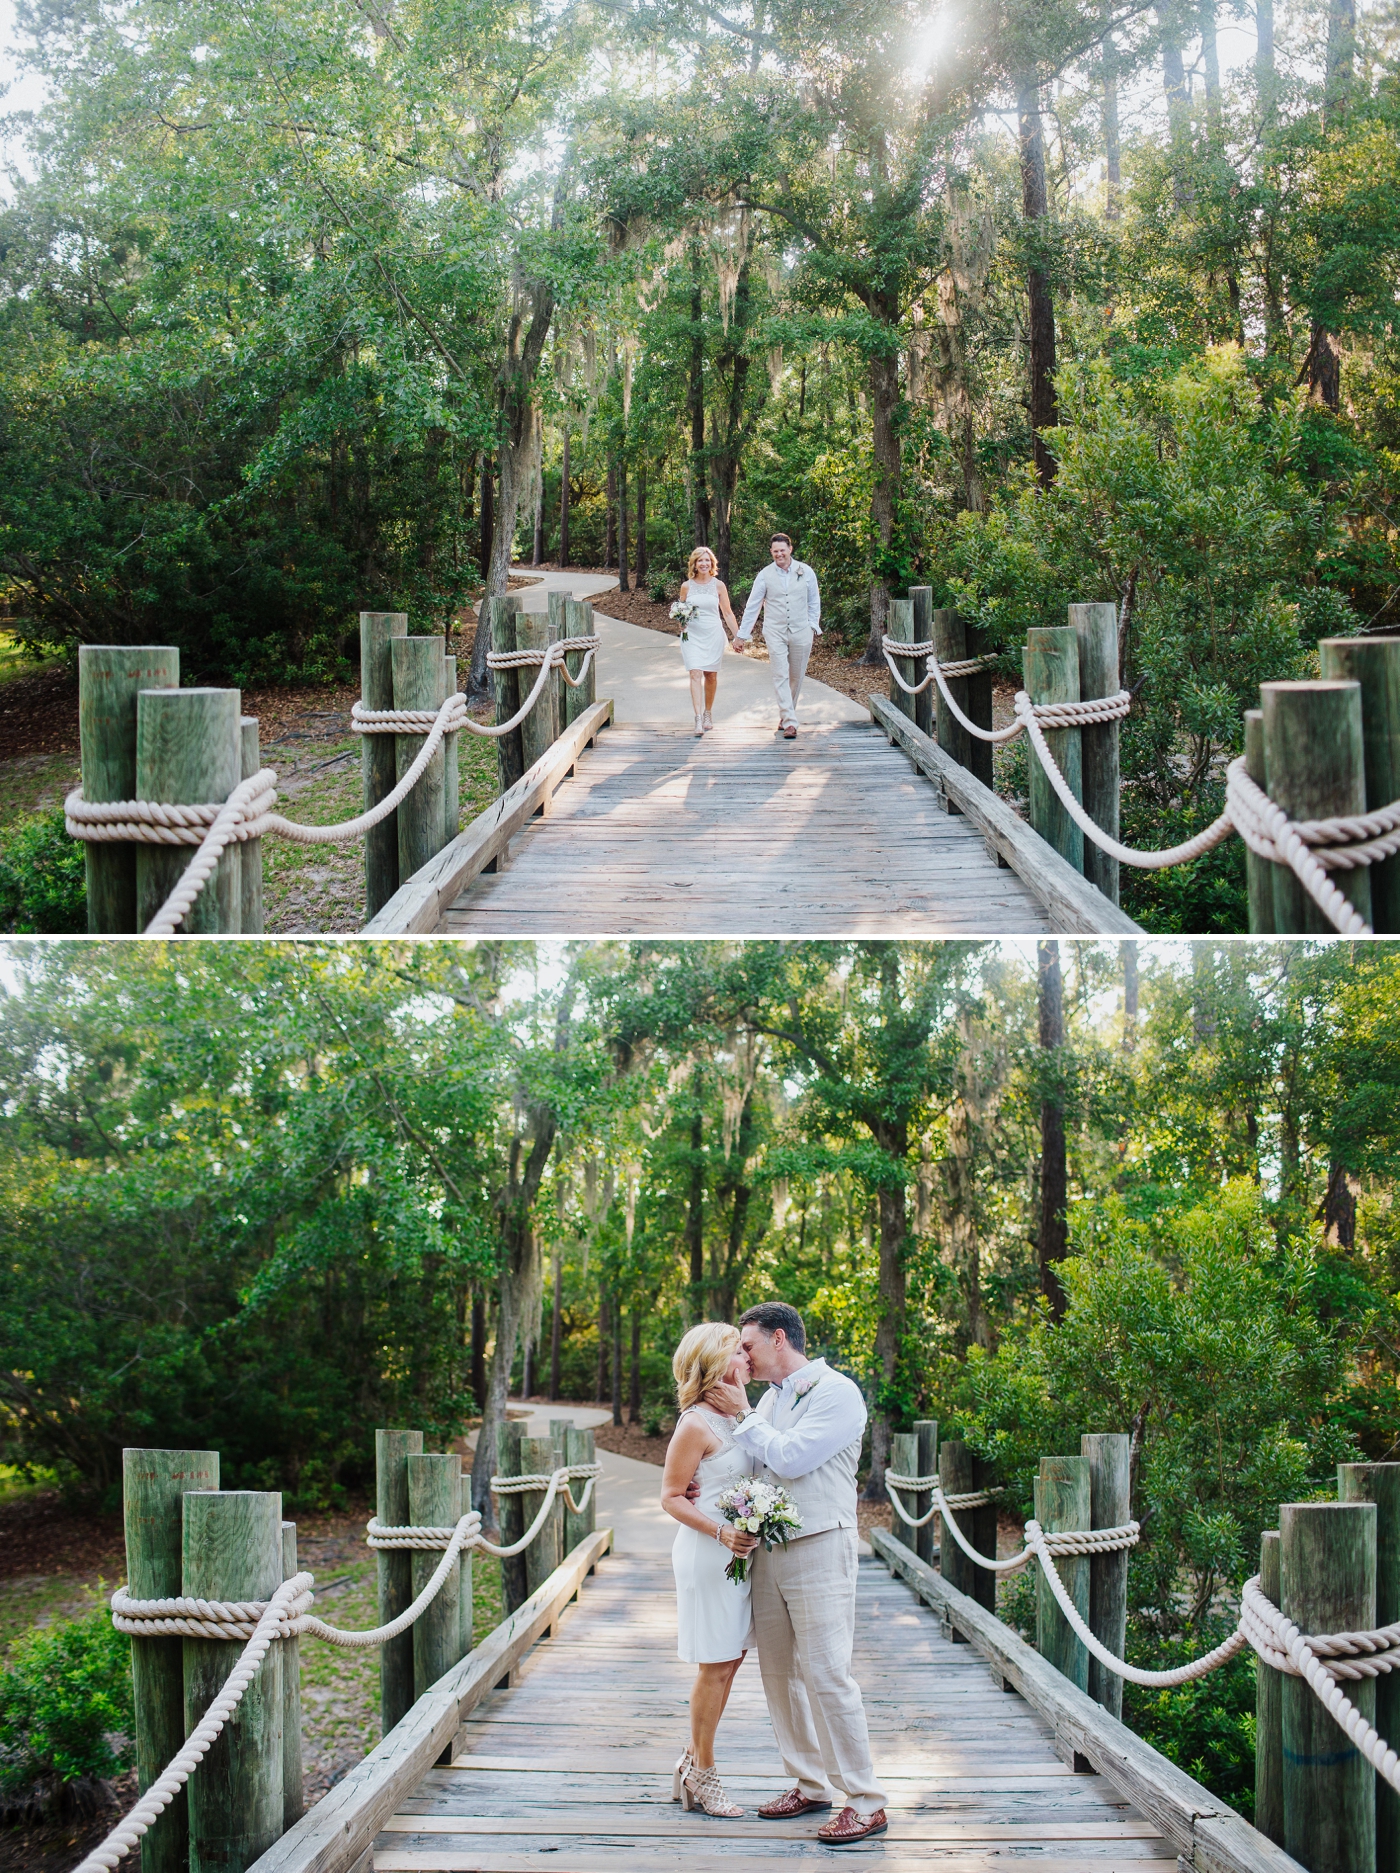 Intimate elopement at The Landings, outside of Historic Savannah | Izzy and Co.